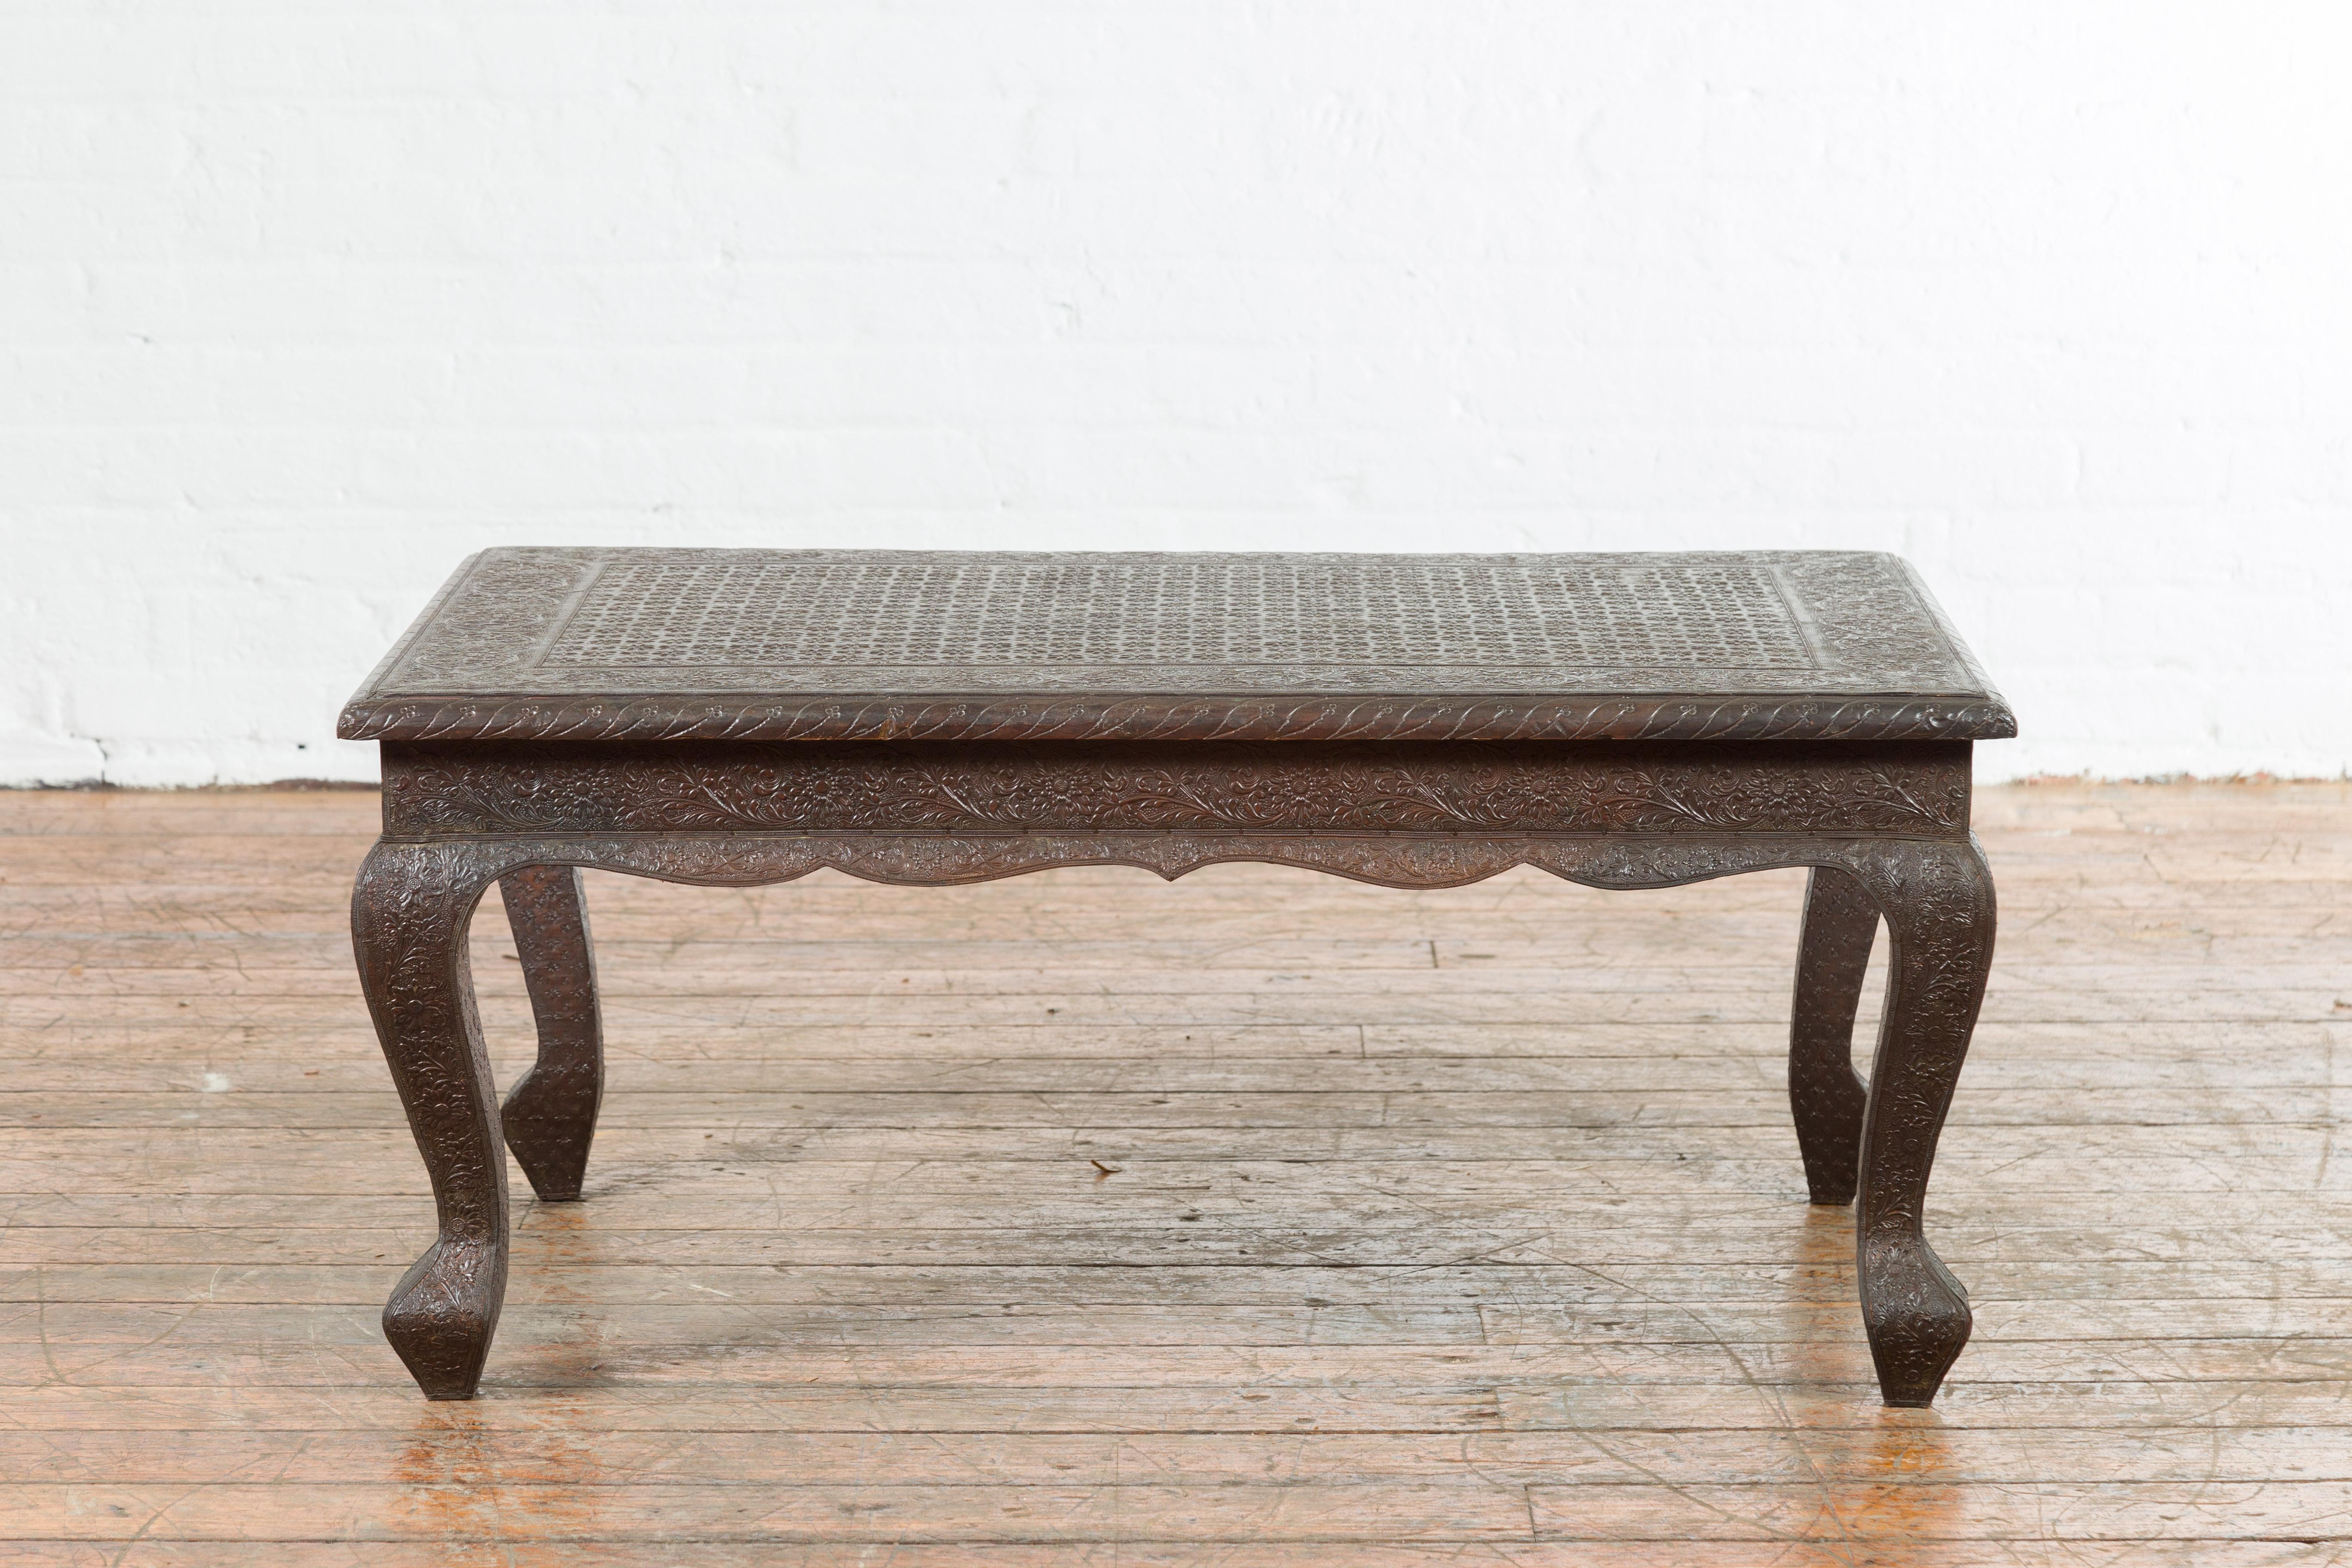 Vintage Indian Coffee Table with Embossed Floral Design and Cabriole Legs For Sale 4